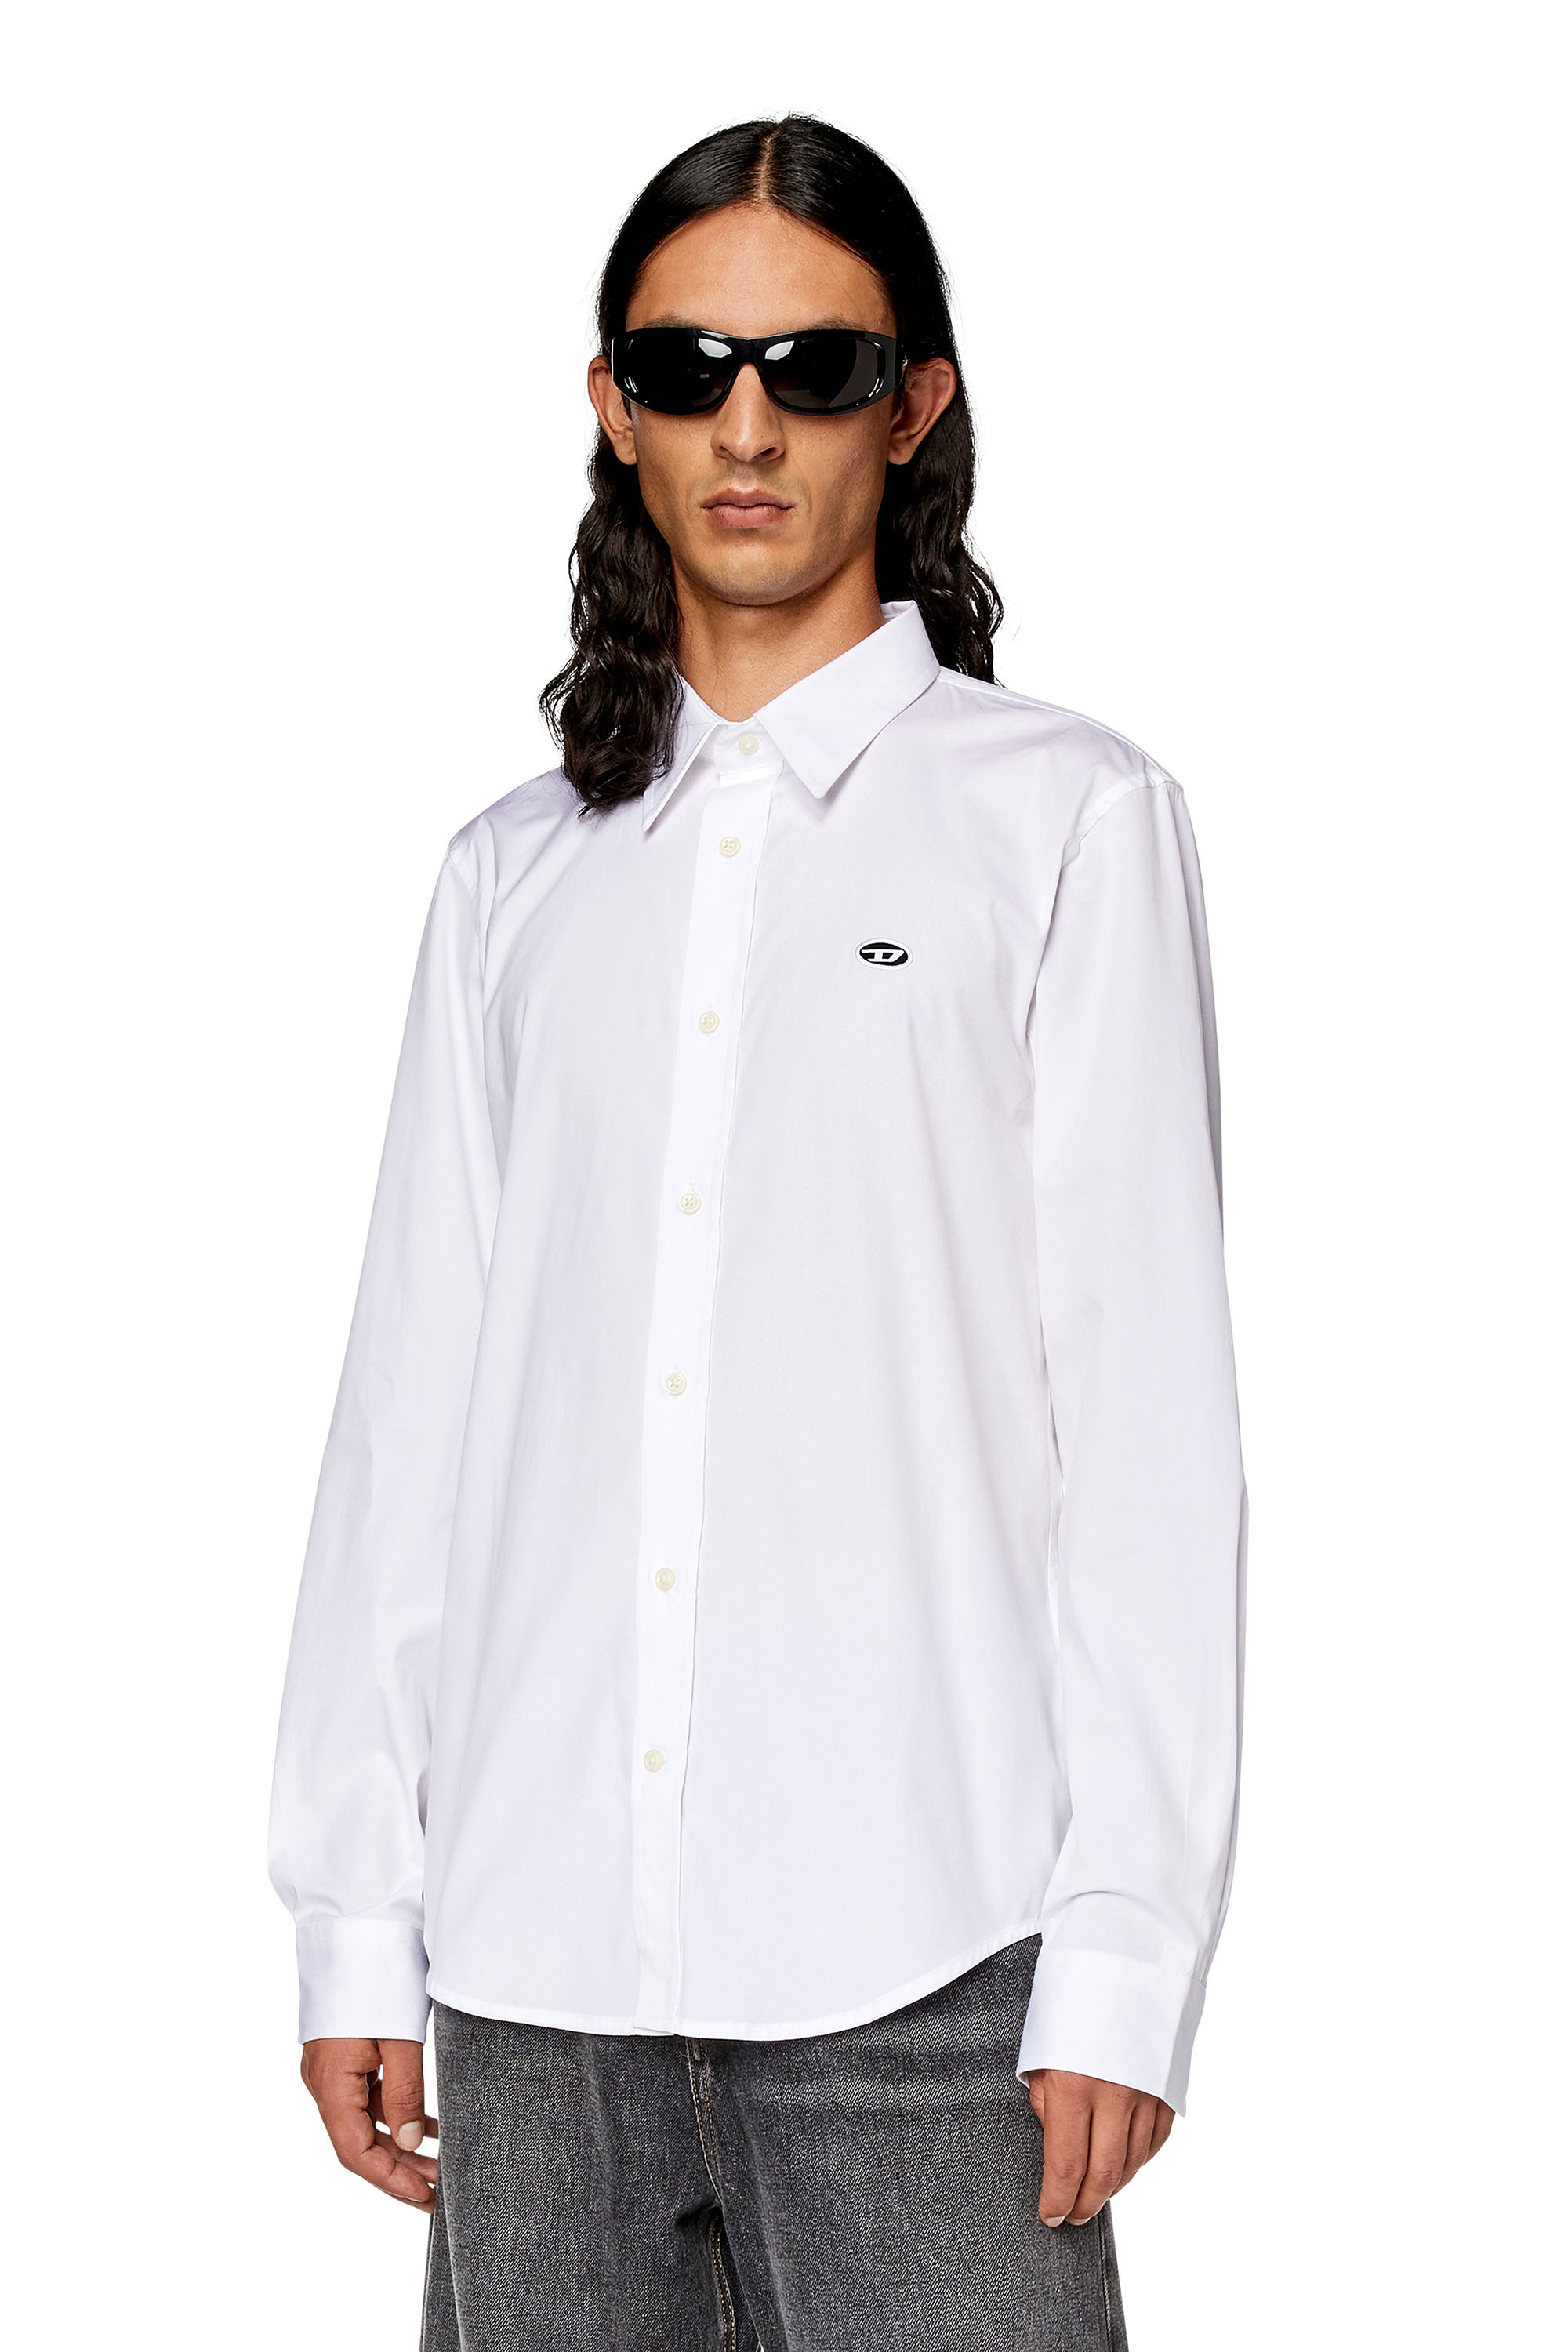 Diesel Shirt With Oval D Patch In White